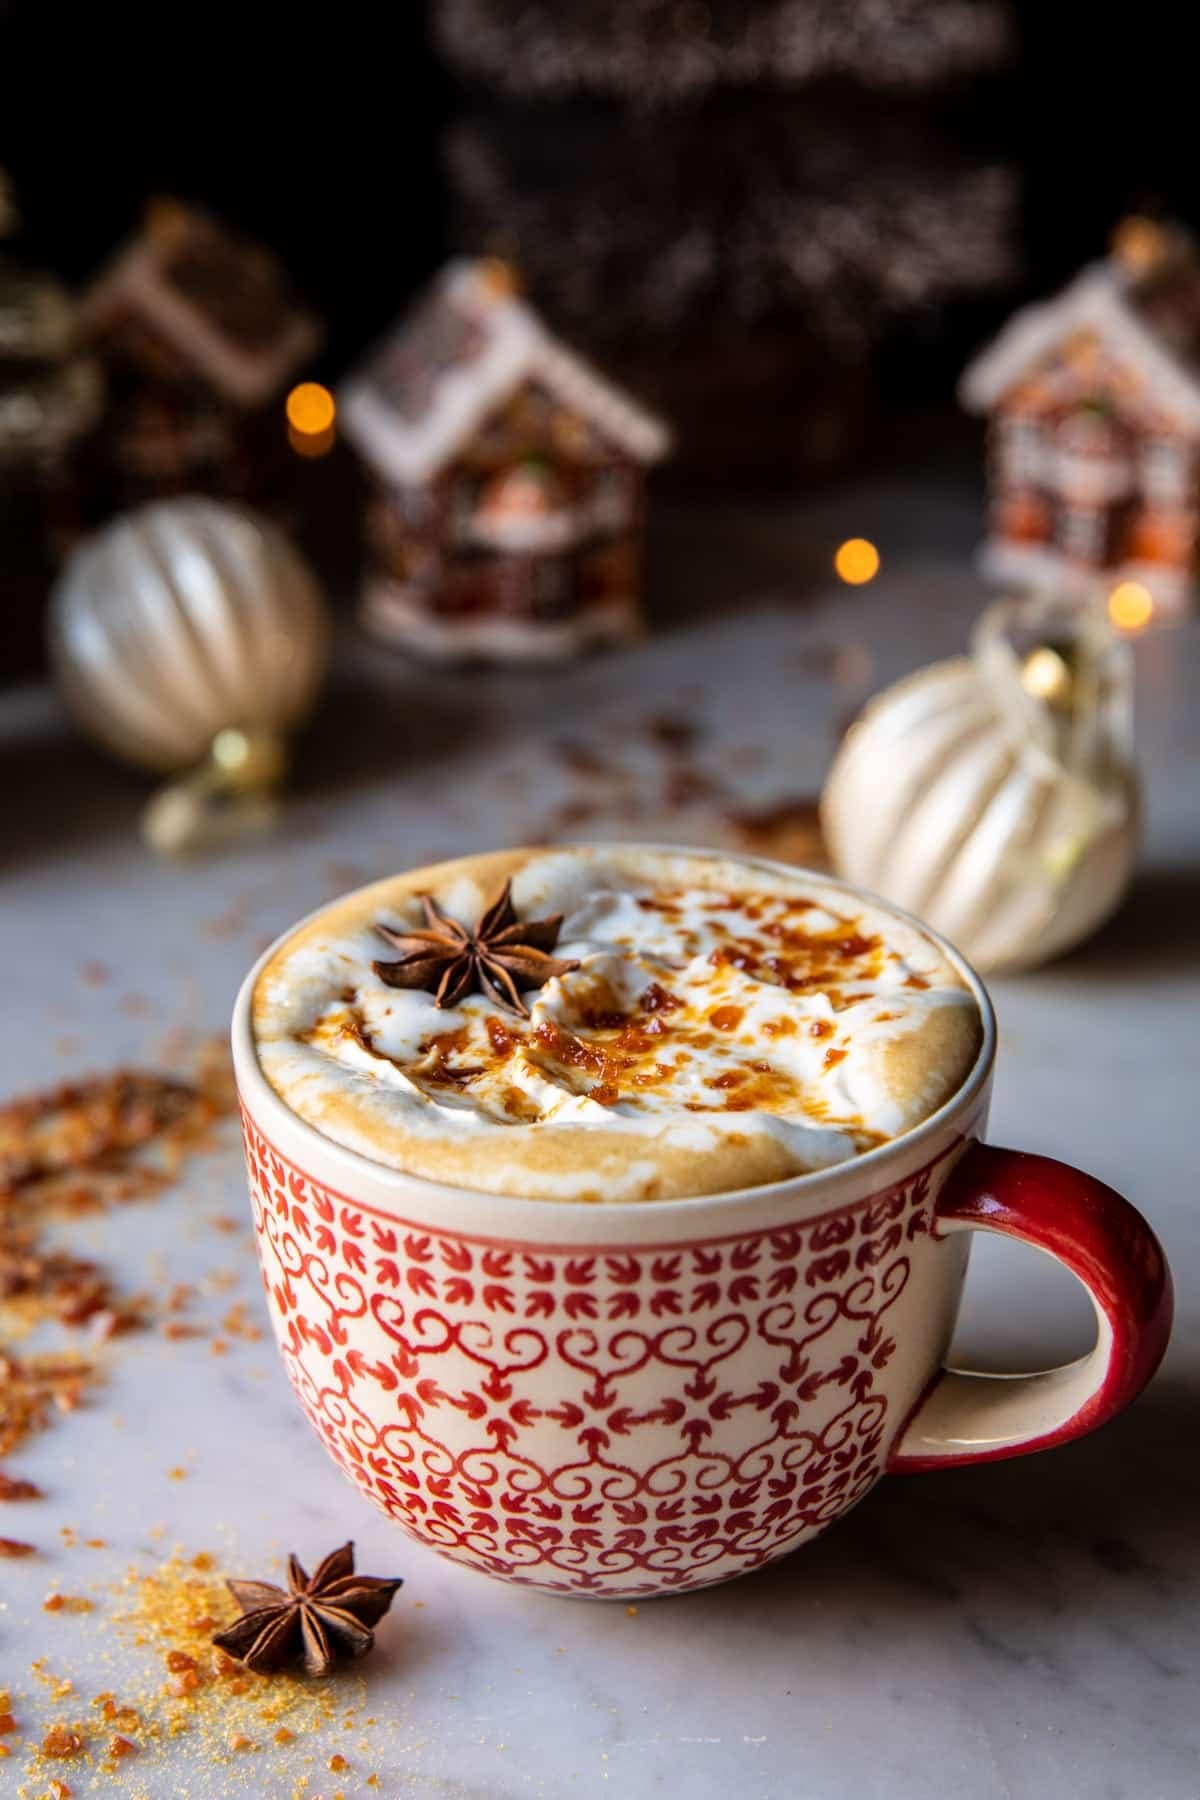 Vanilla gingerbread latte on a red pattern mug opped with a sweet caramel brulee.